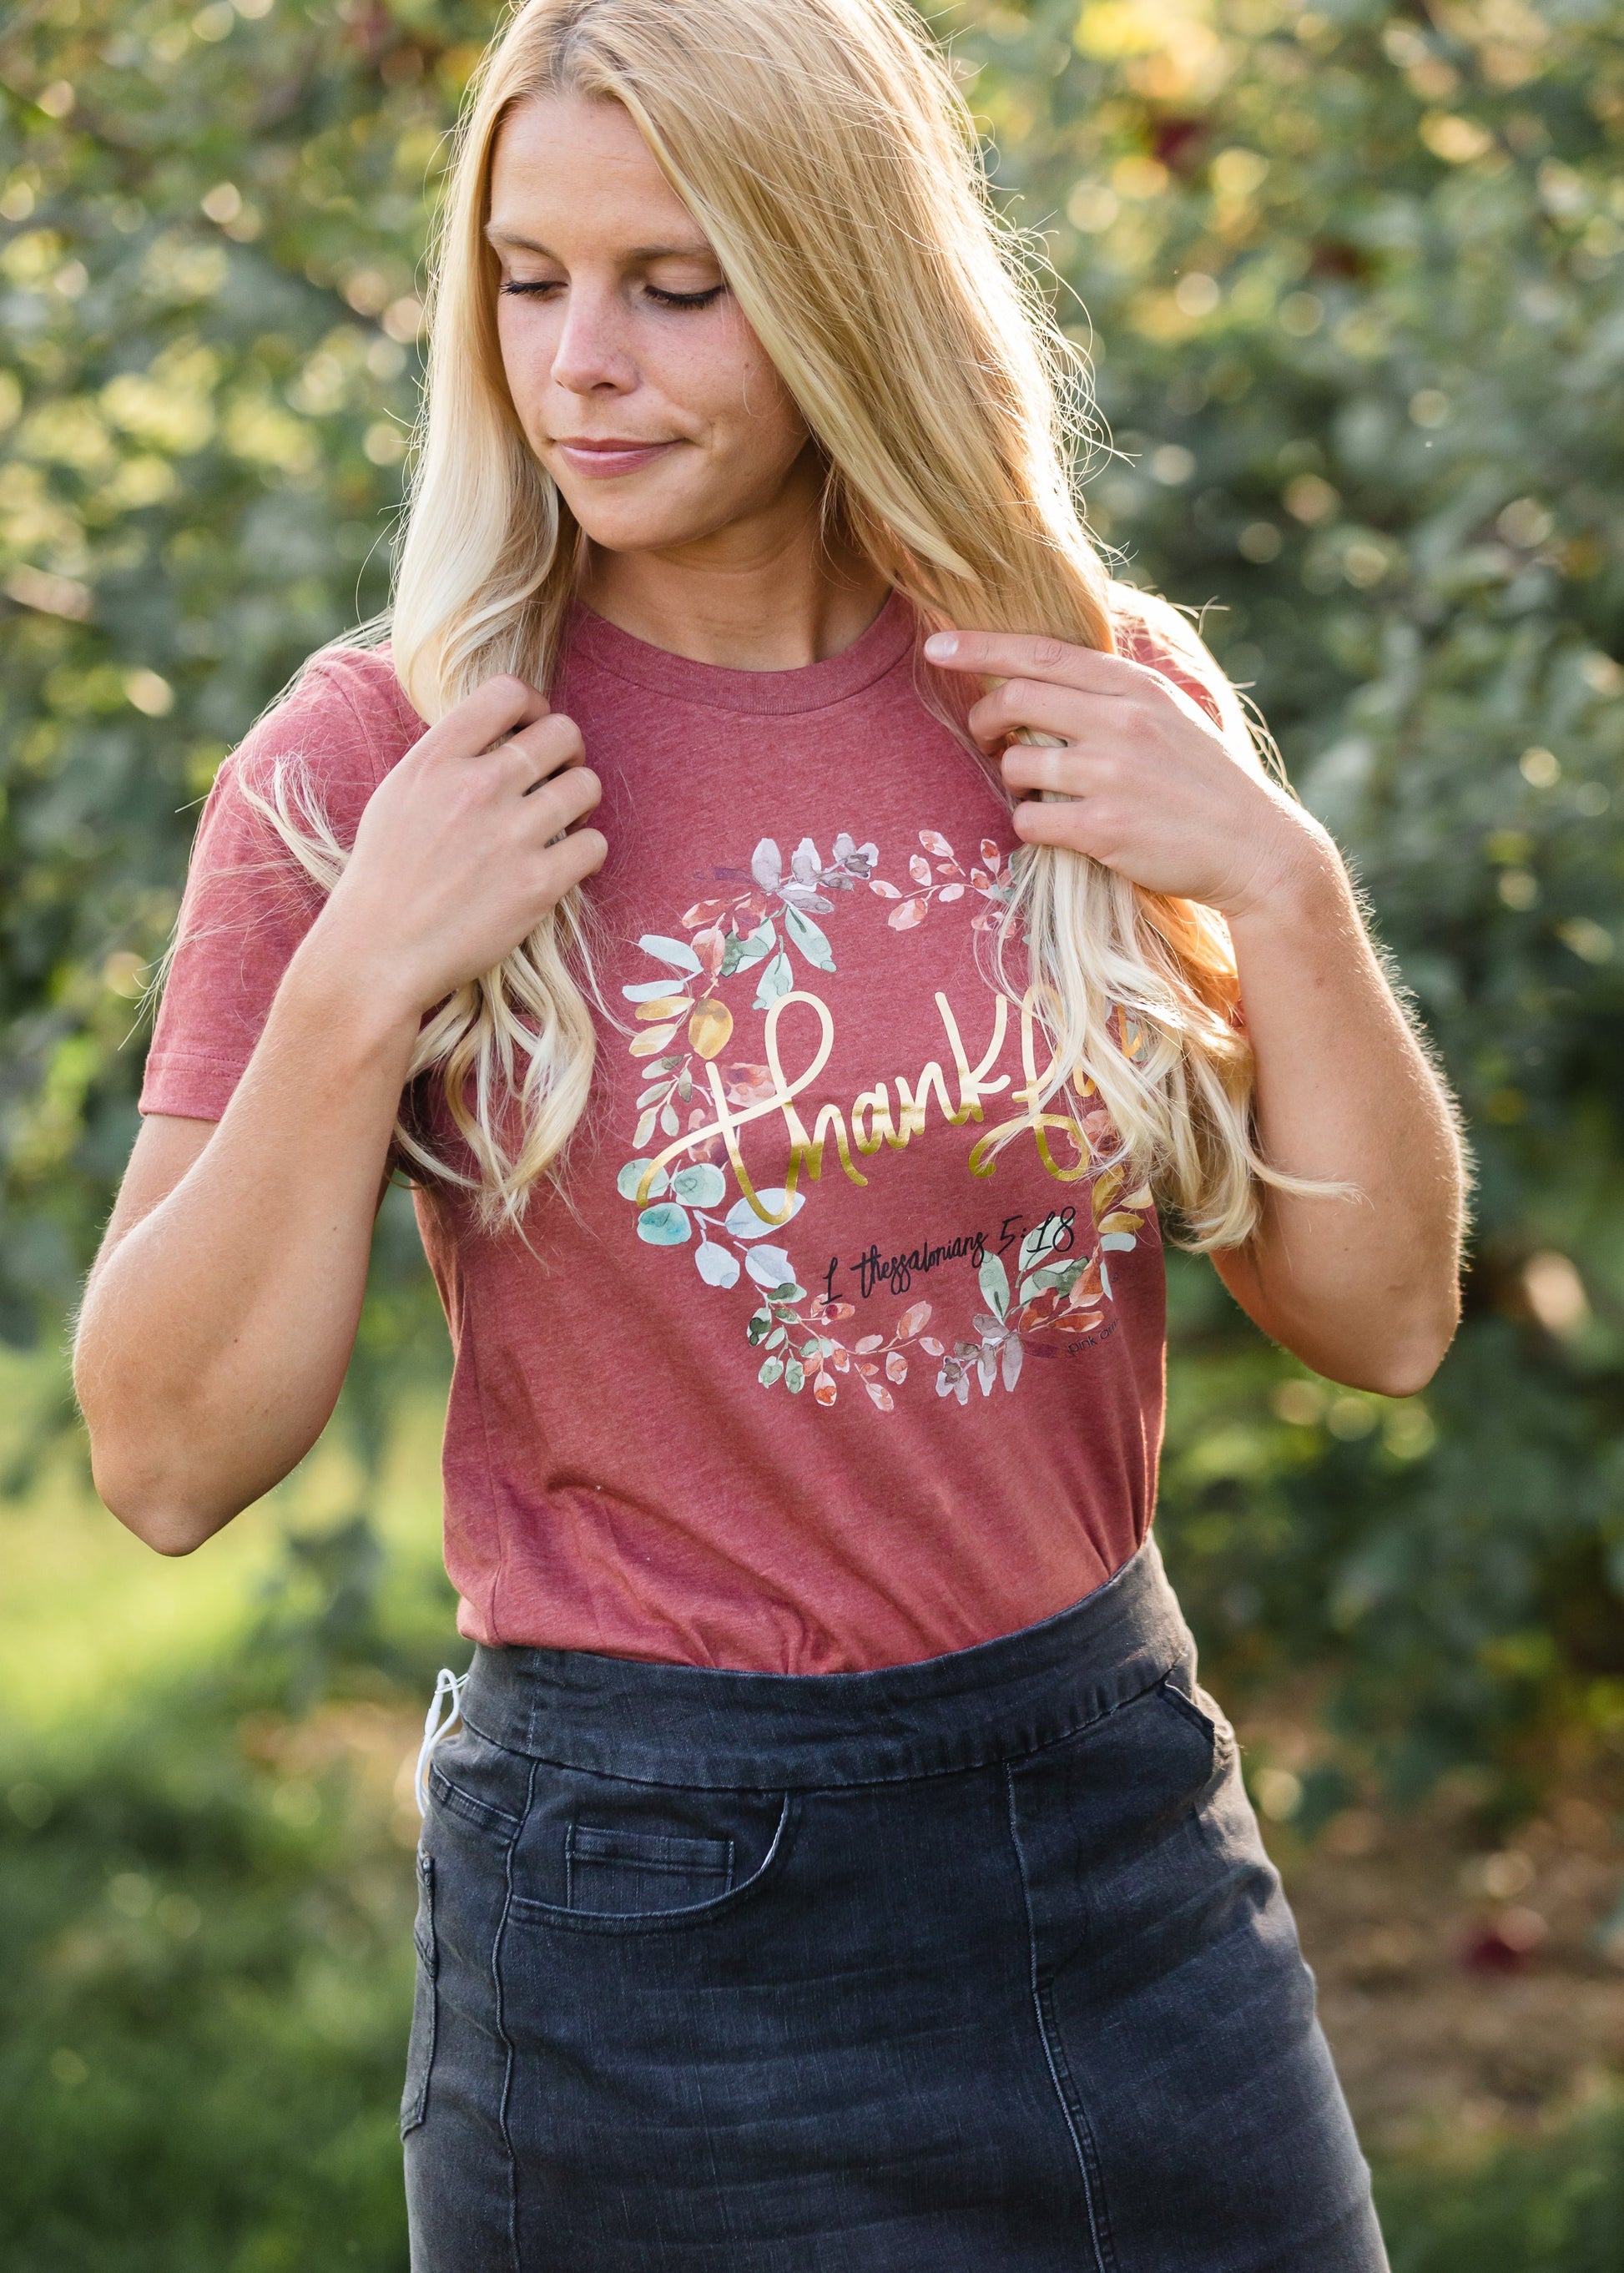 Thankful Floral Vintage Graphic Tee - FINAL SALE Shirt